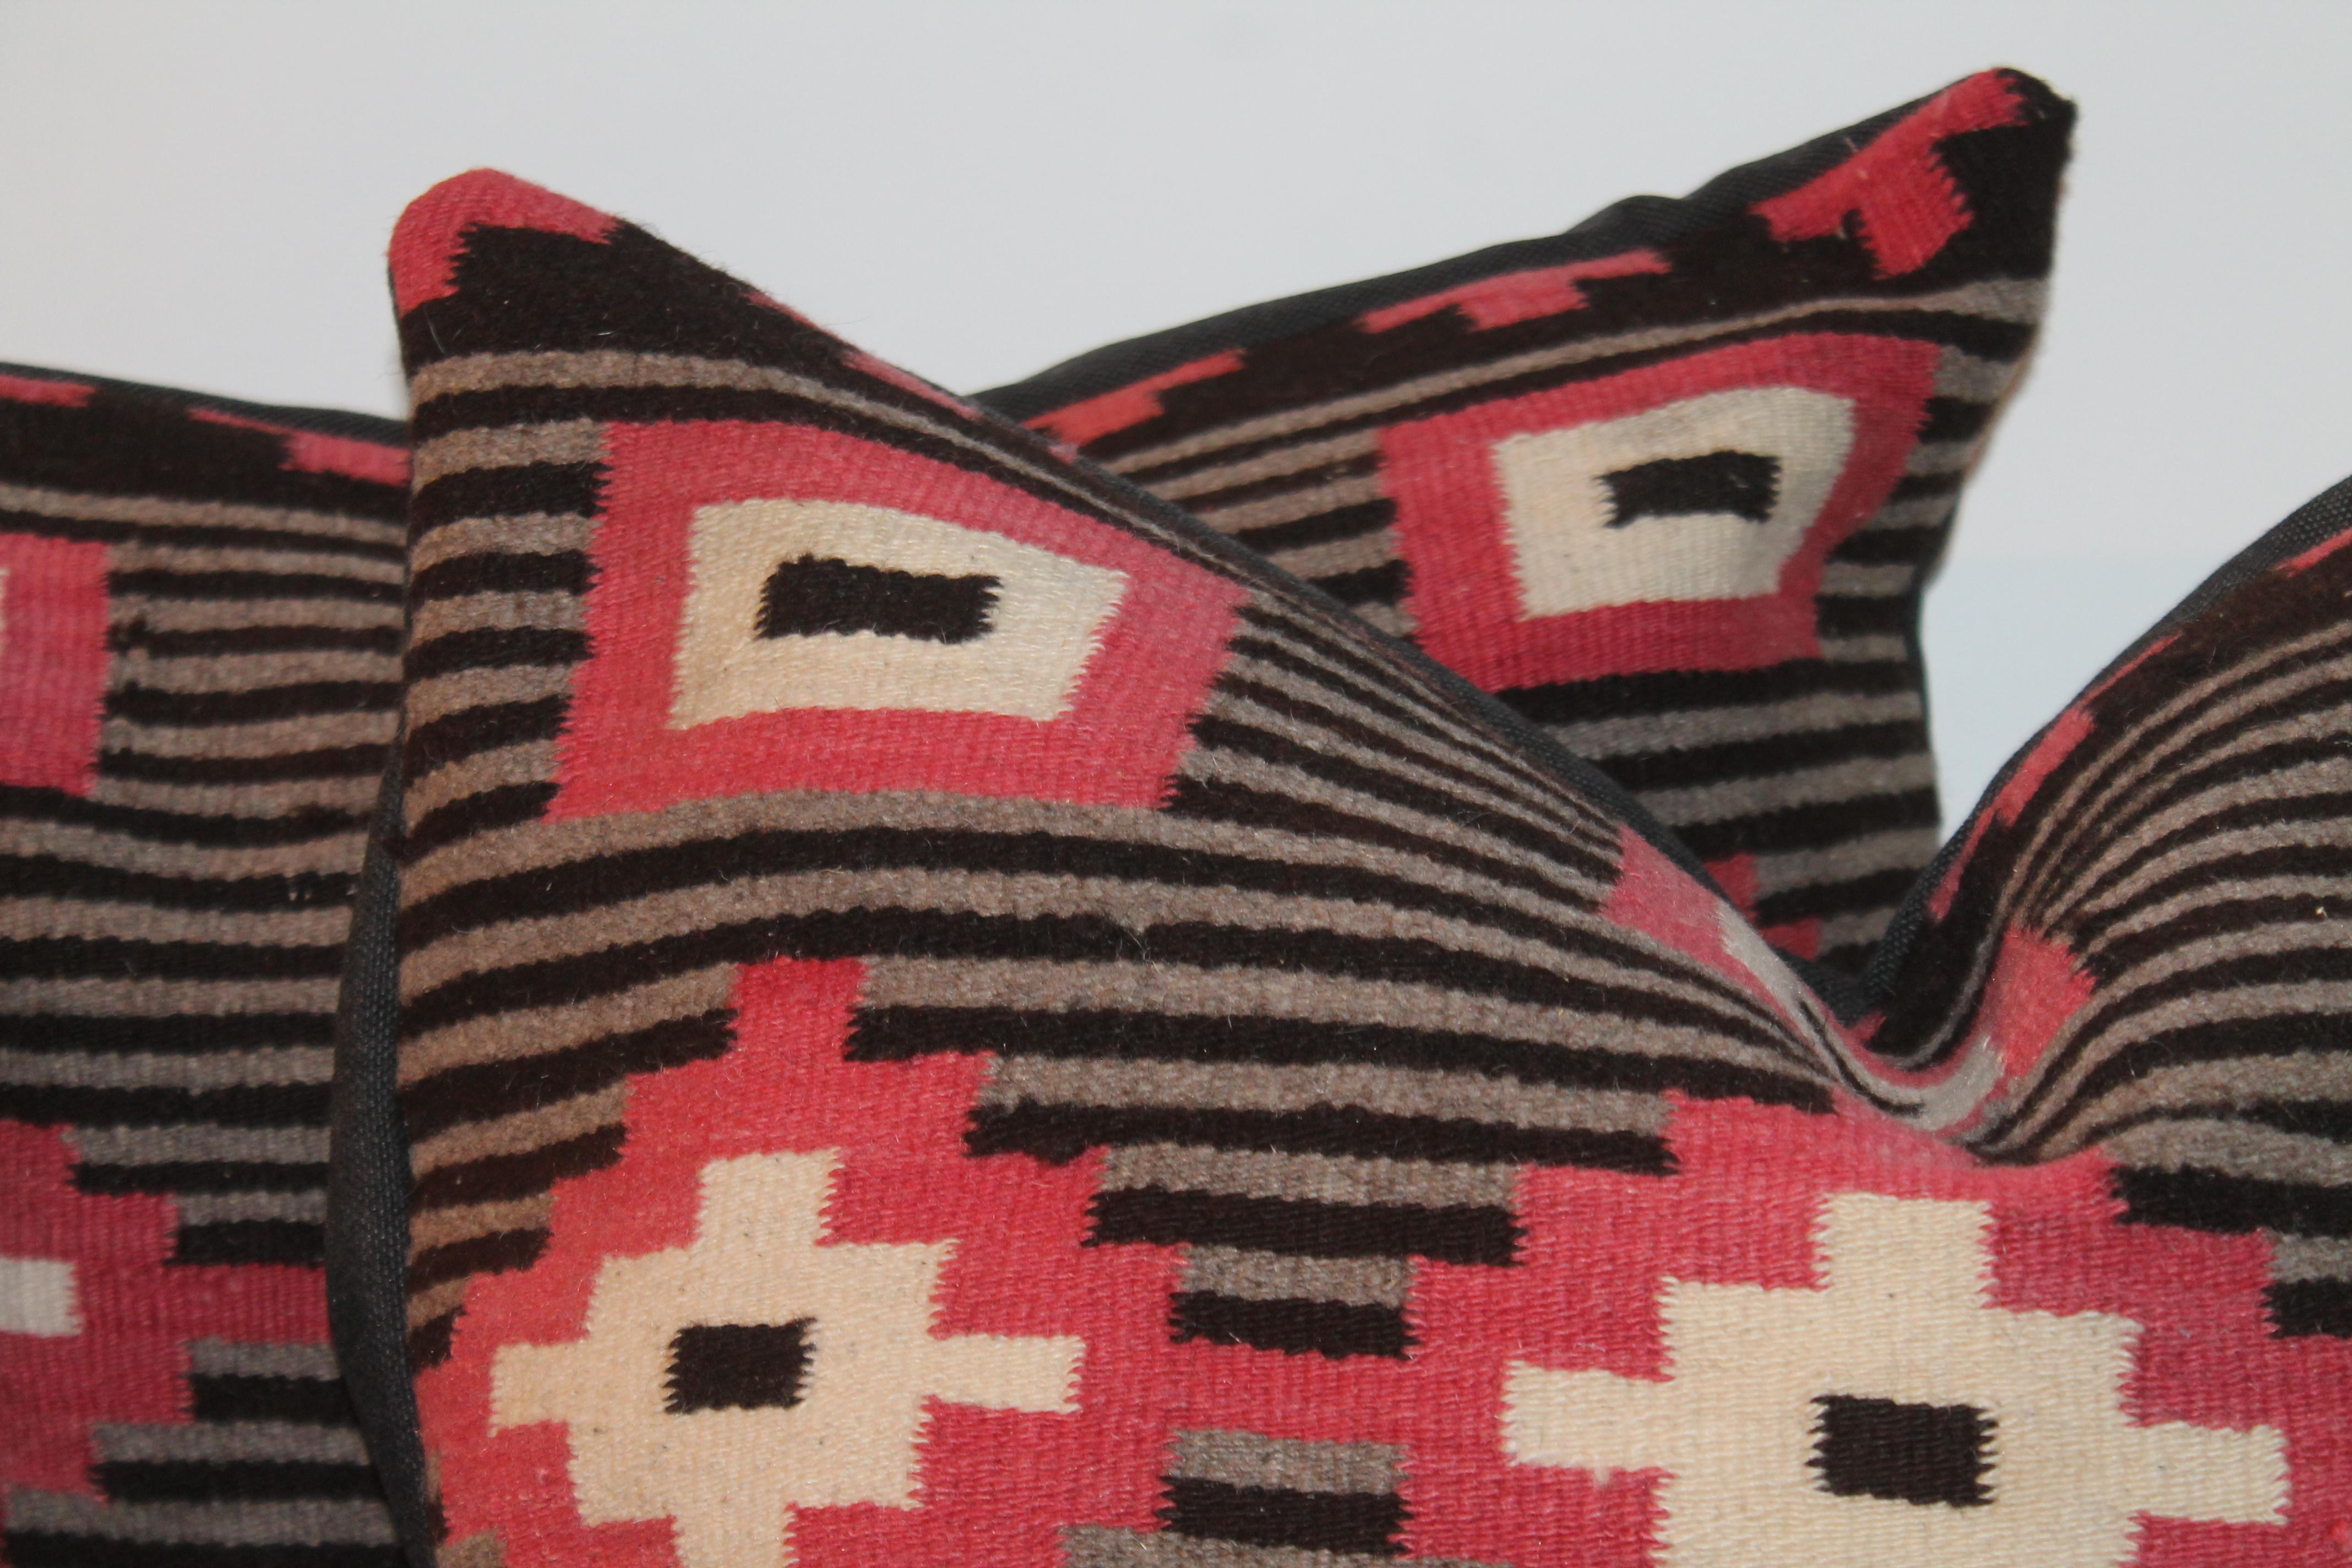 These folky eye dazzle Navajo Indian weaving bolster pillows are in fine condition. The backings are in black linen fabric.